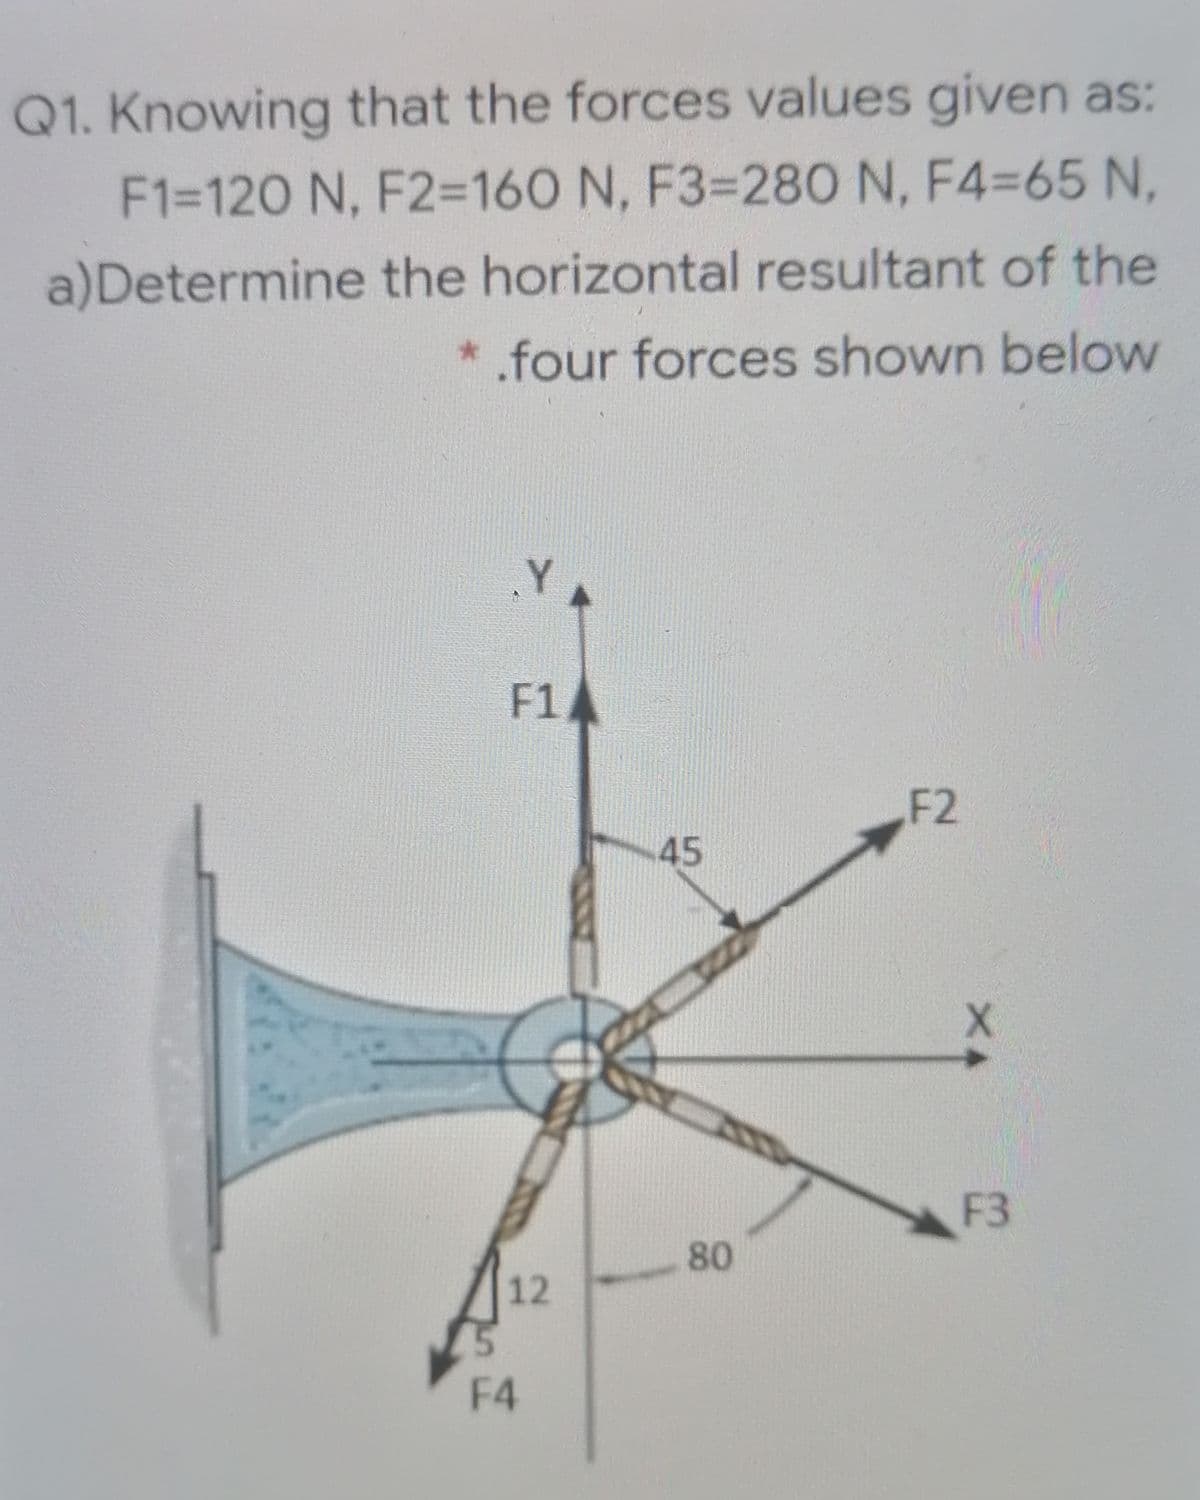 Q1. Knowing that the forces values given as:
F1%=120 N, F2%3D160 N, F3=280 N, F4=65 N,
a)Determine the horizontal resultant of the
*.four forces shown below
.Y
F1
F2
F3
80
12
F4
X4
45
